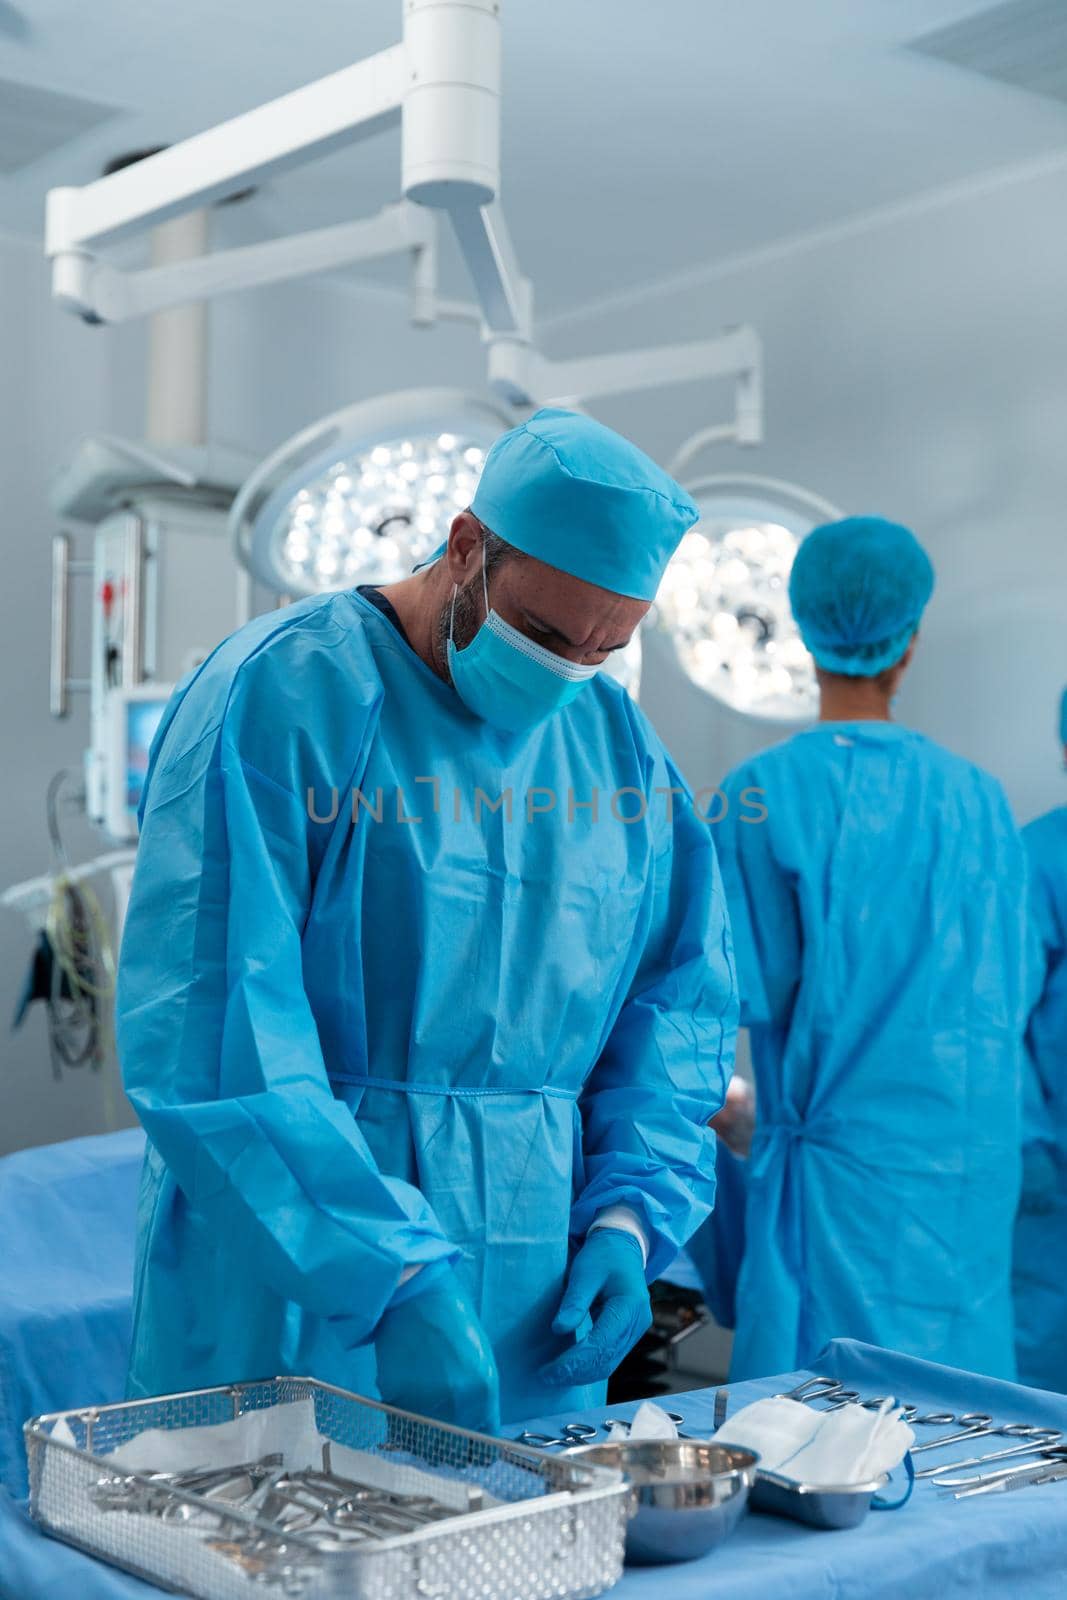 Caucasian male surgeon wearing face mask and protective clothing in operating theatre by Wavebreakmedia